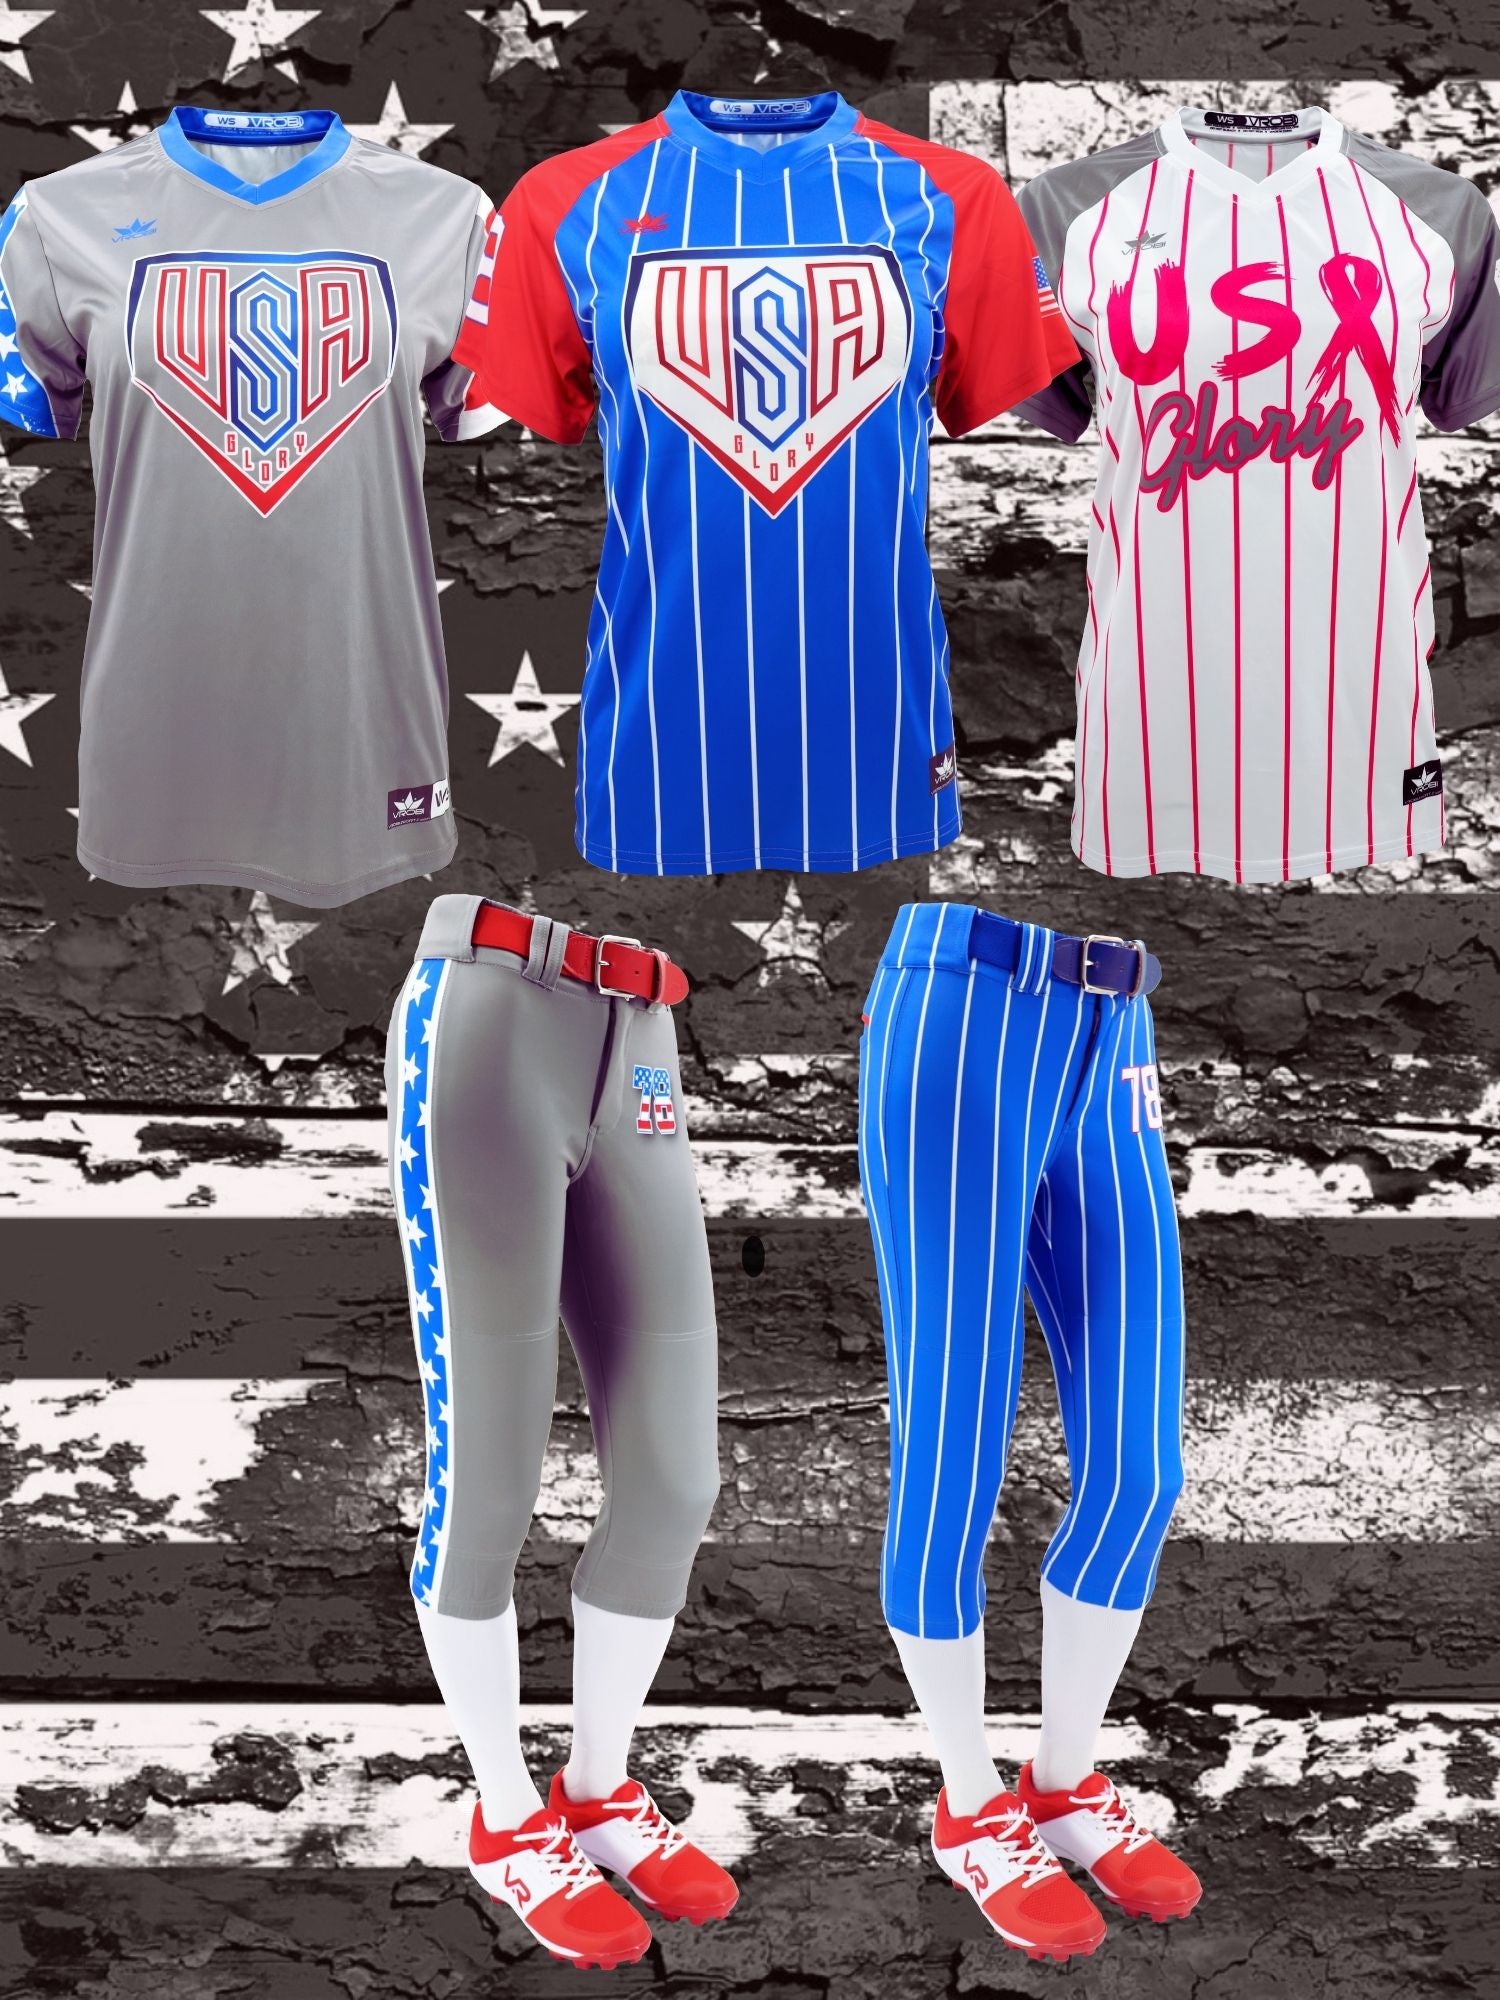 Silver Softball Team Package for Fastpitch Softball Teams showing custom uniforms